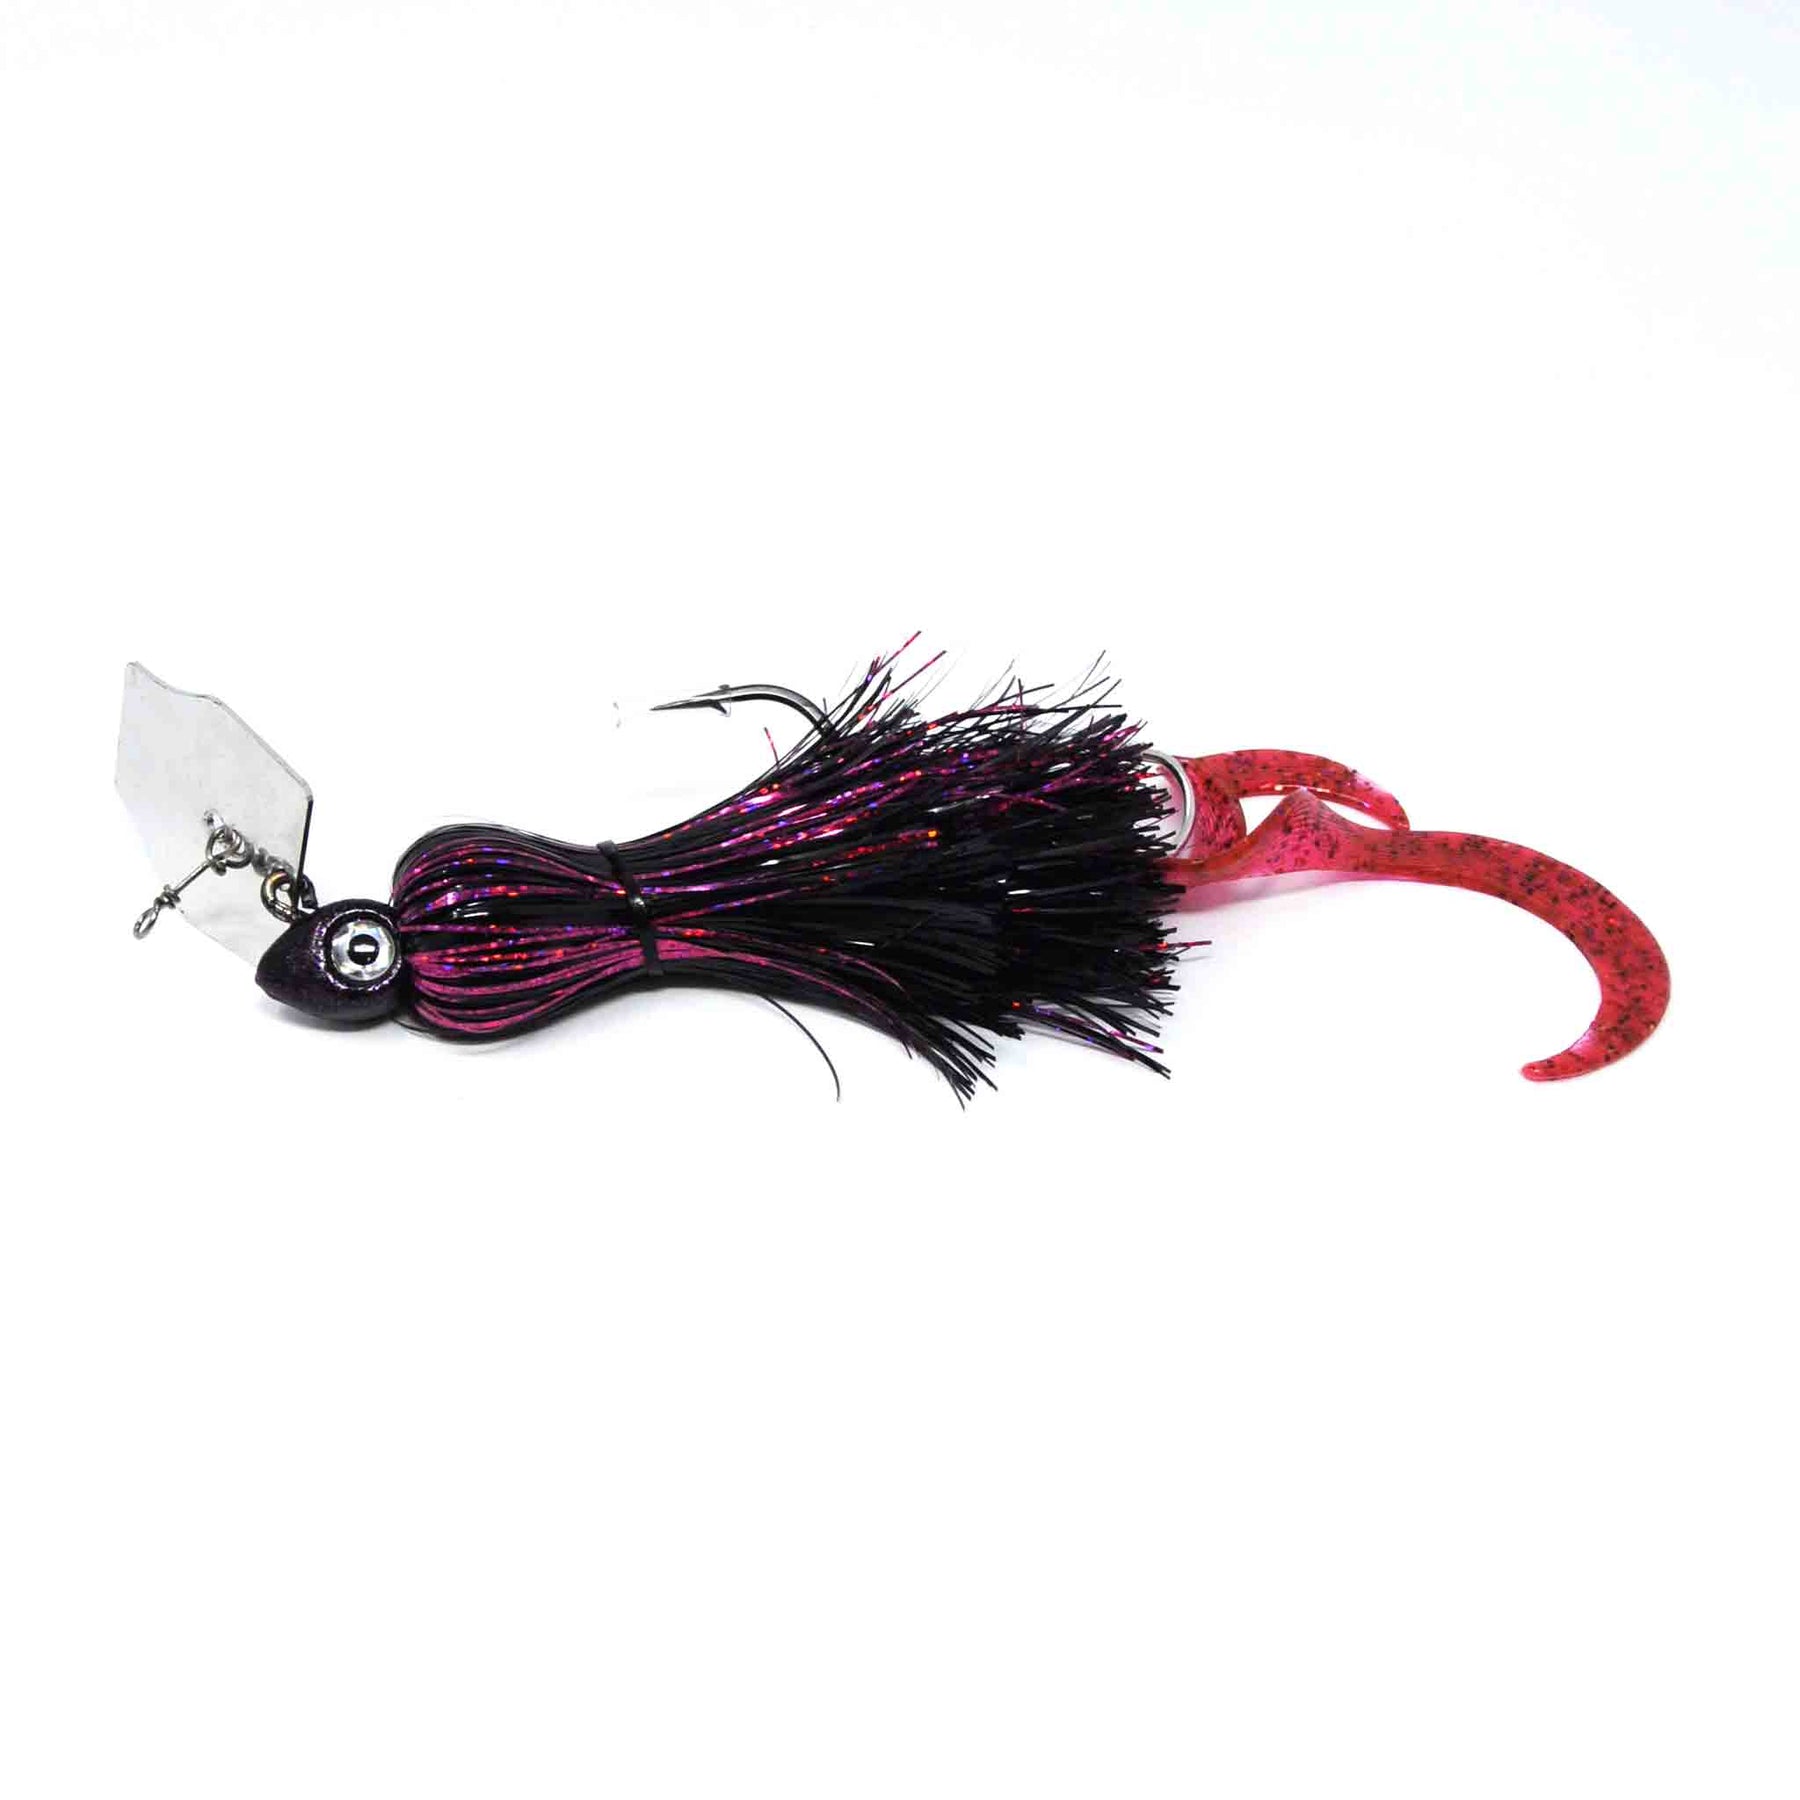 SS Leurres Sky-Candy Chatterbait 3oz Black / Pink Chatterbaits